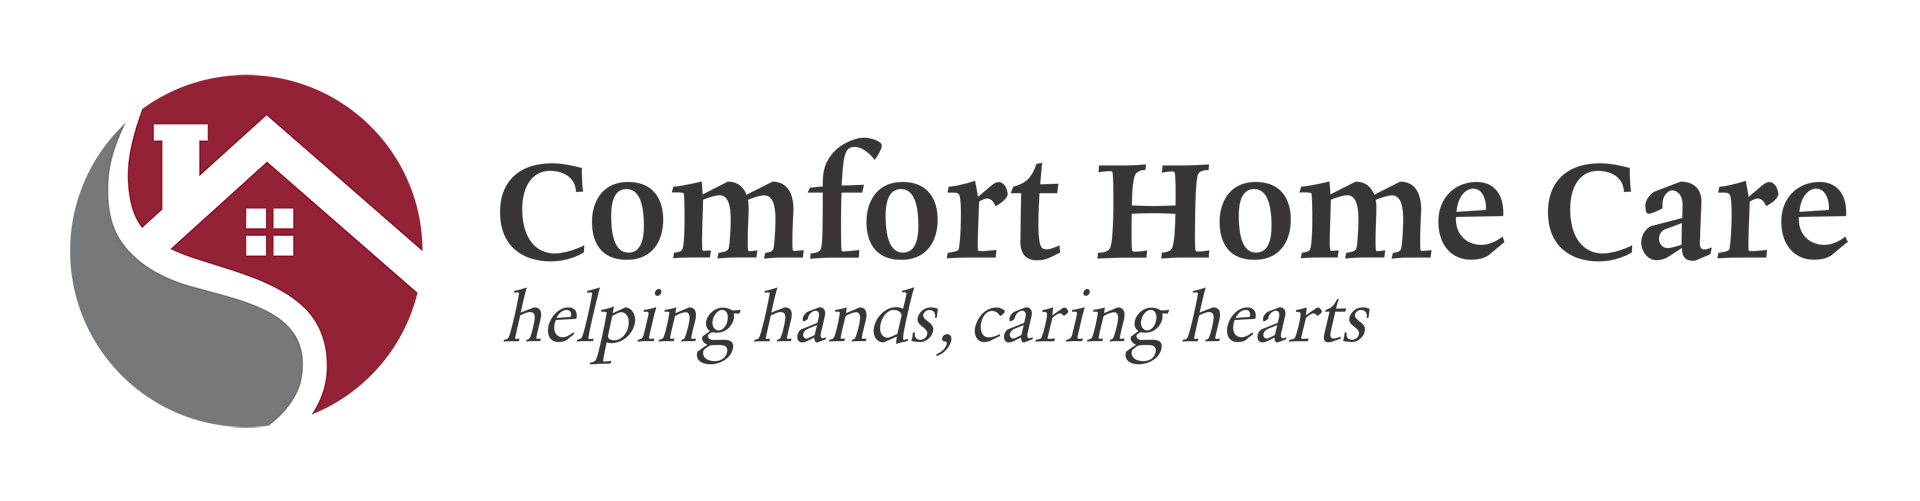 Comfort Home Care 